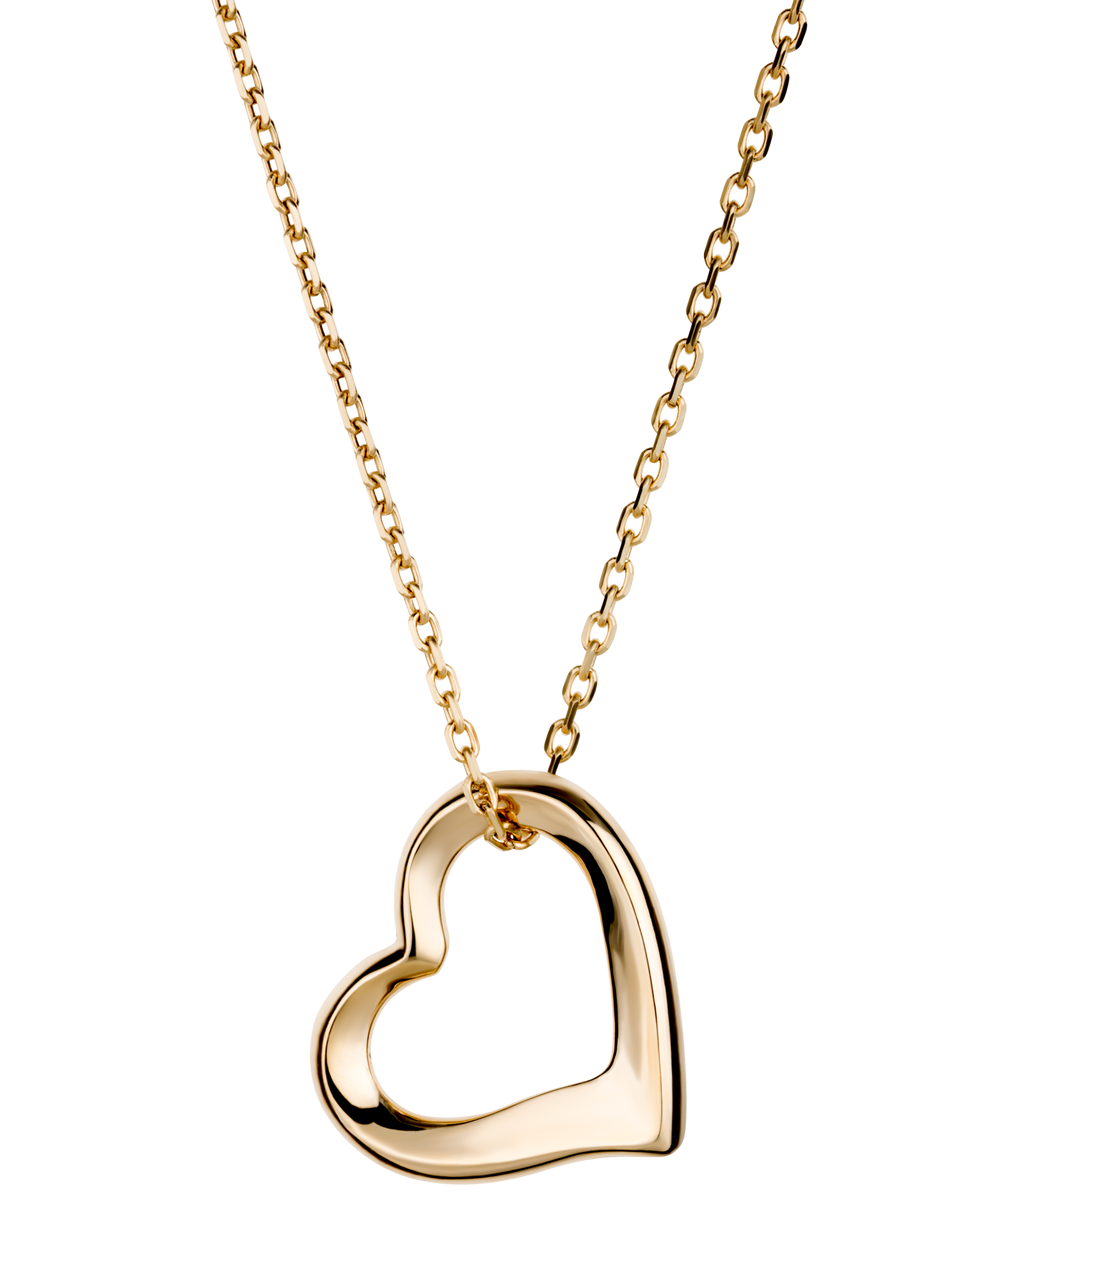 Triple Heart Charm Necklace in Solid Gold - Tales In Gold